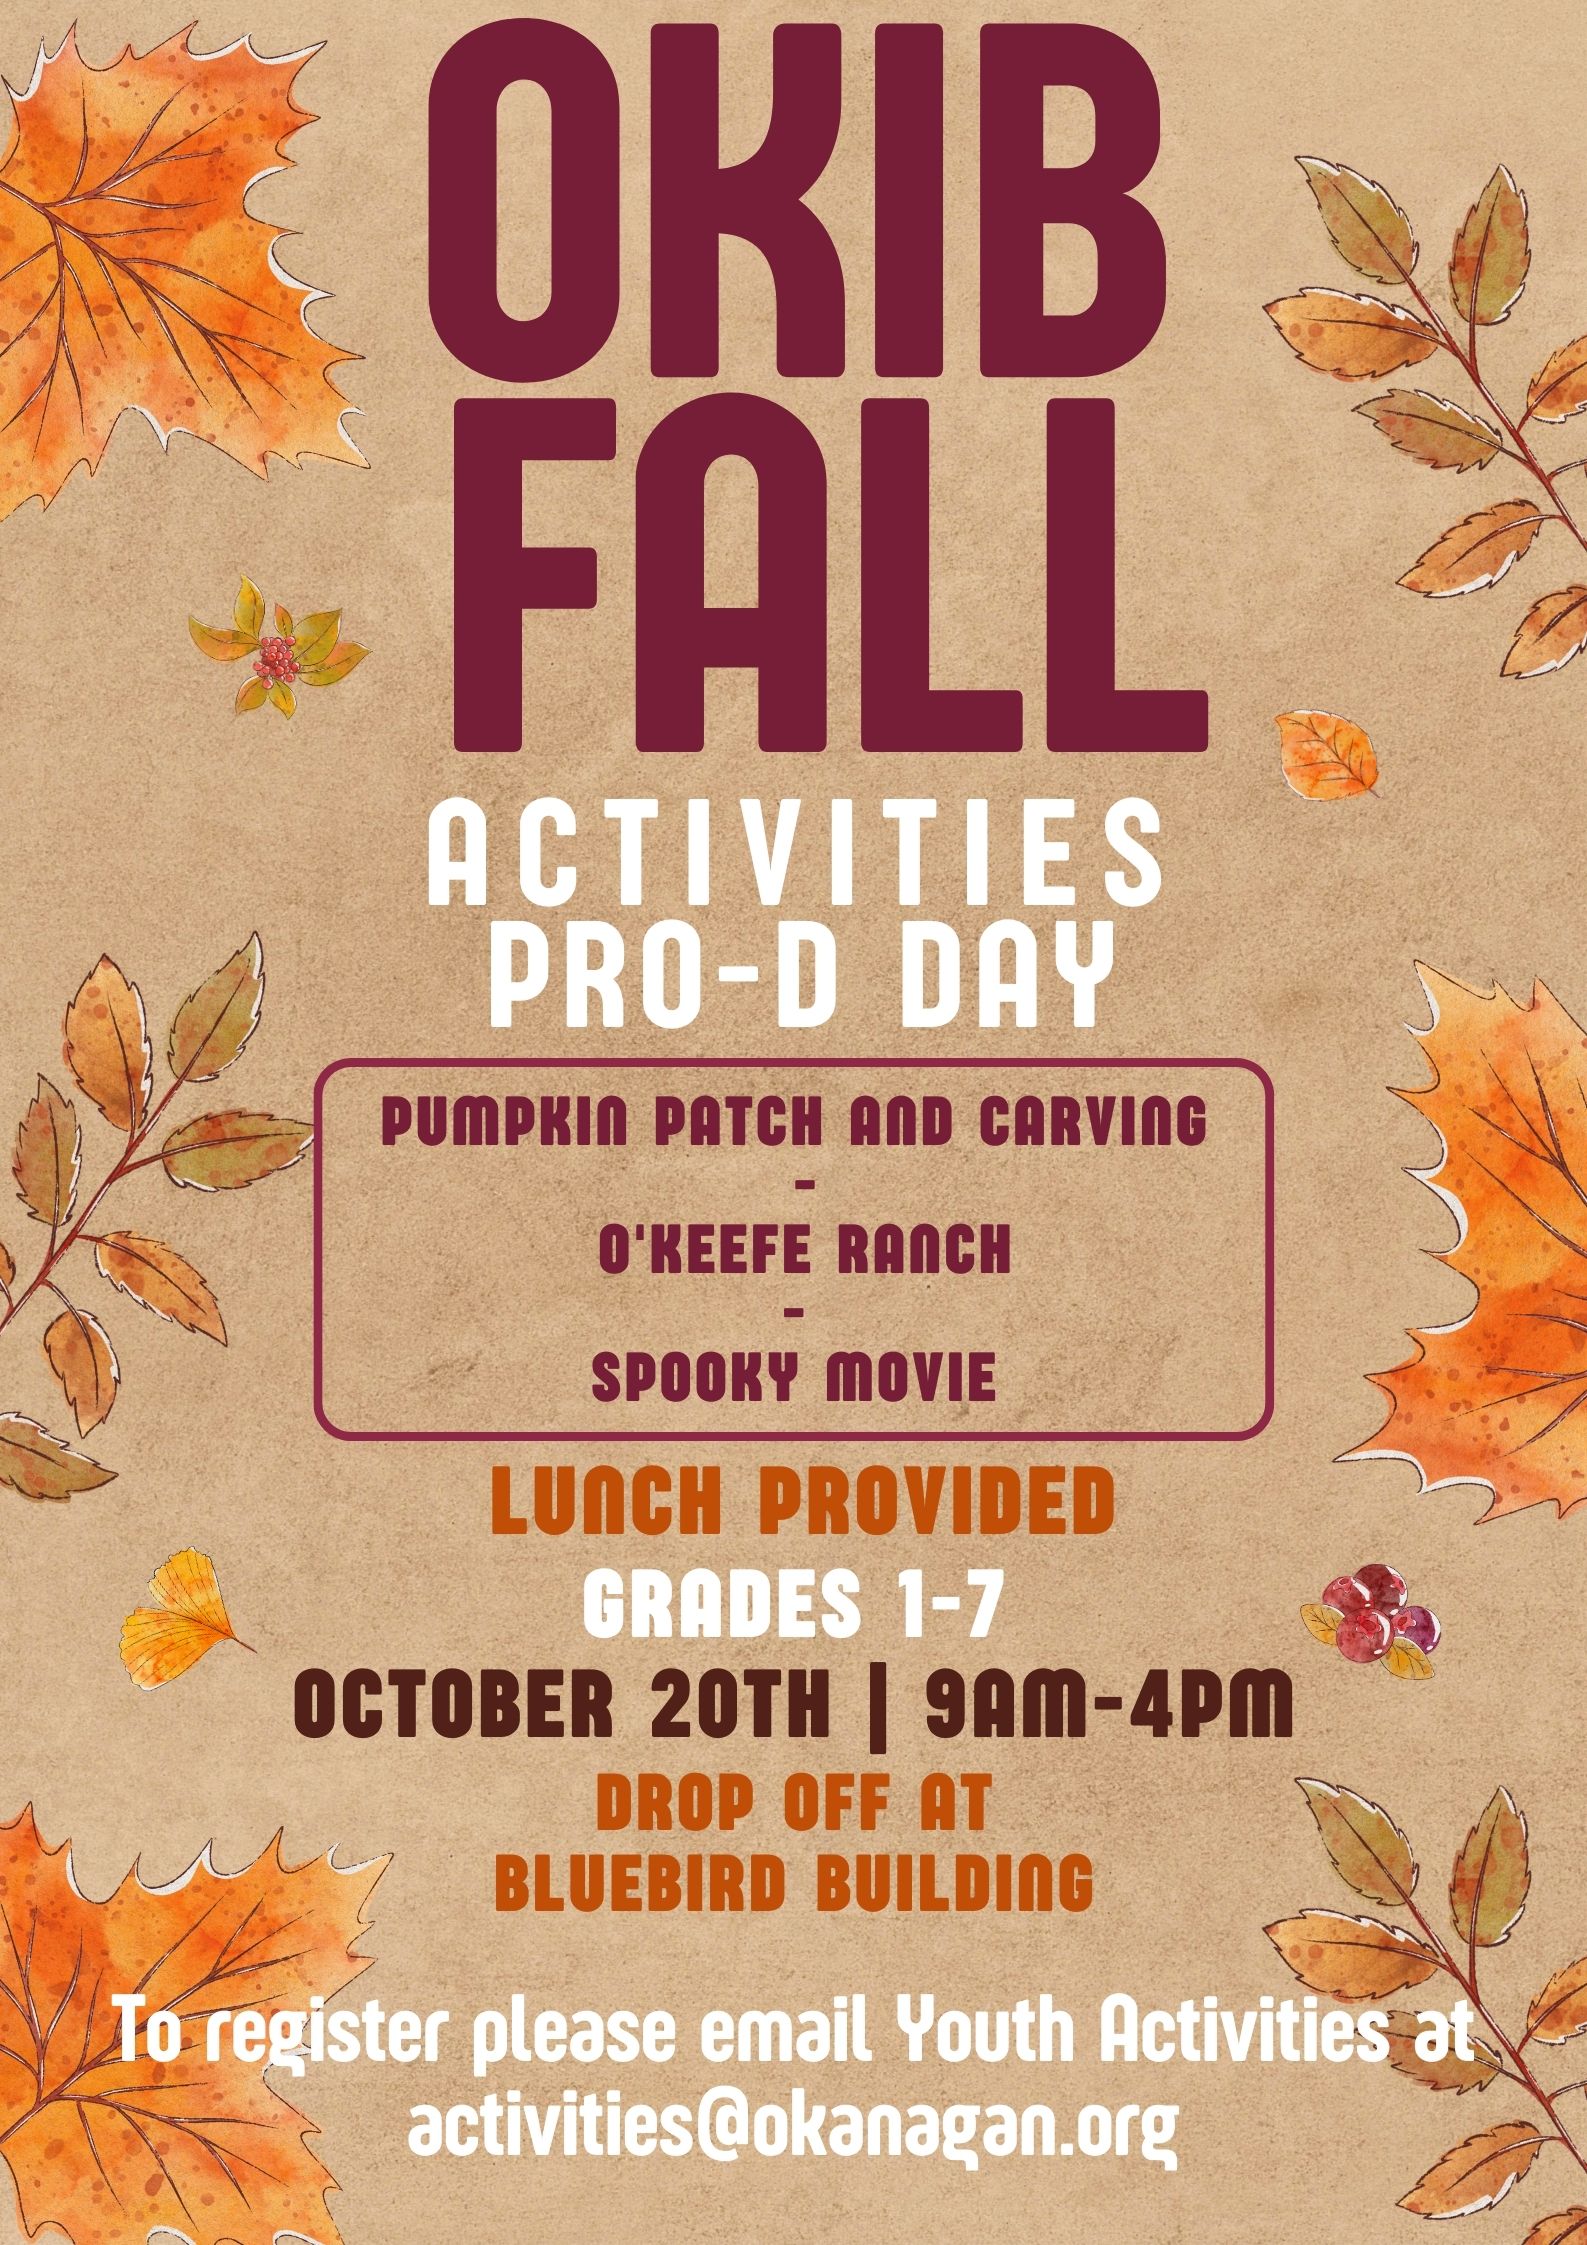 Fall Youth Pro-D day activities